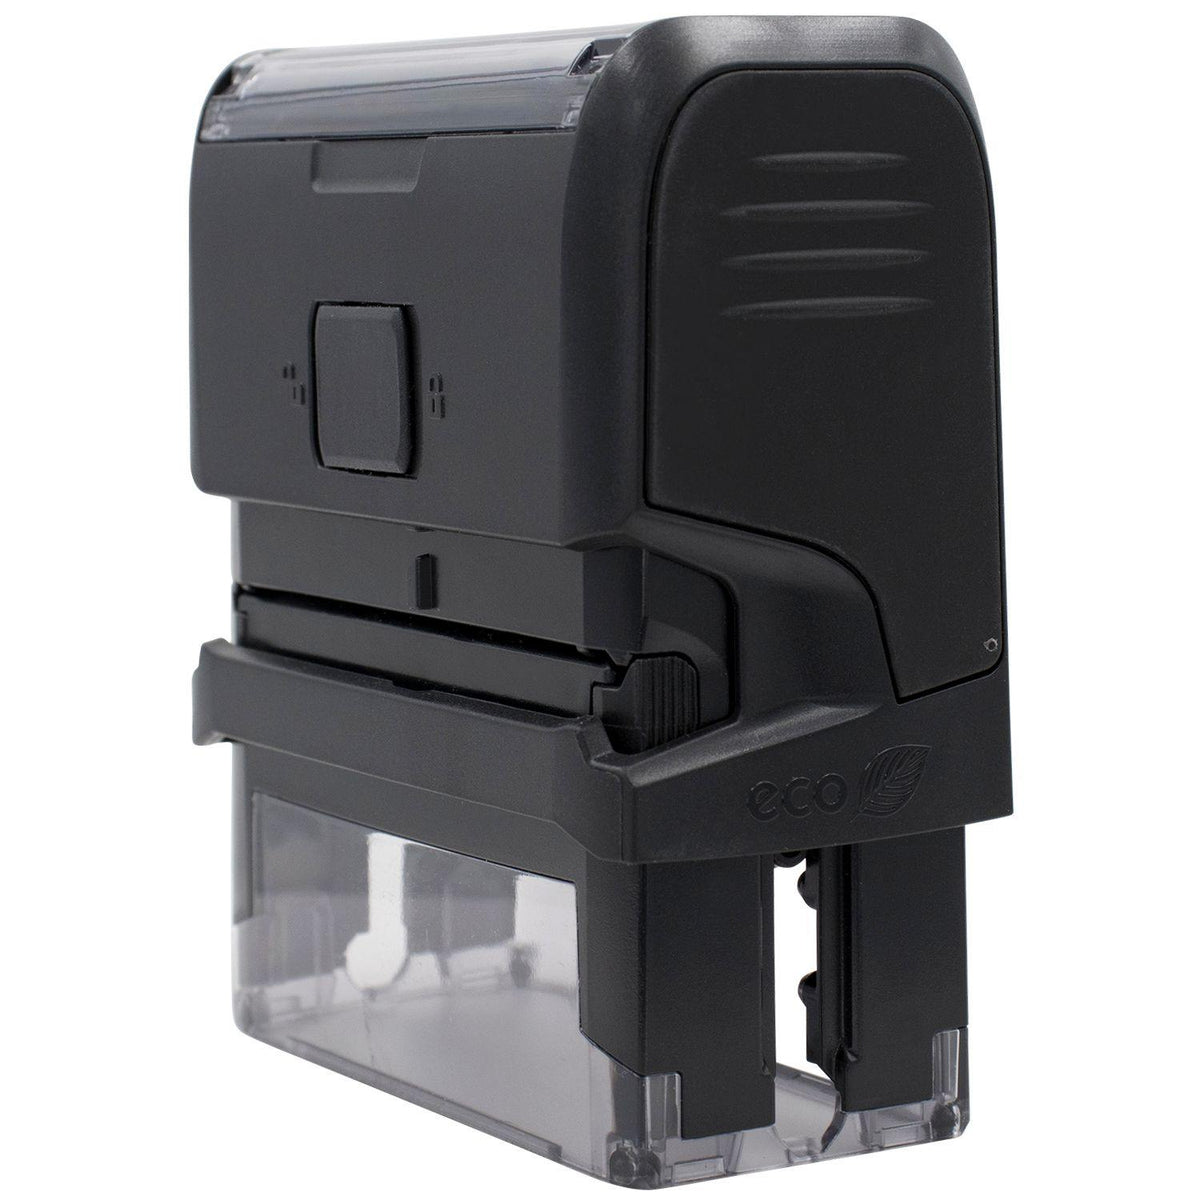 Side View of Large Self-Inking Additional Postage Required Stamp at an Angle